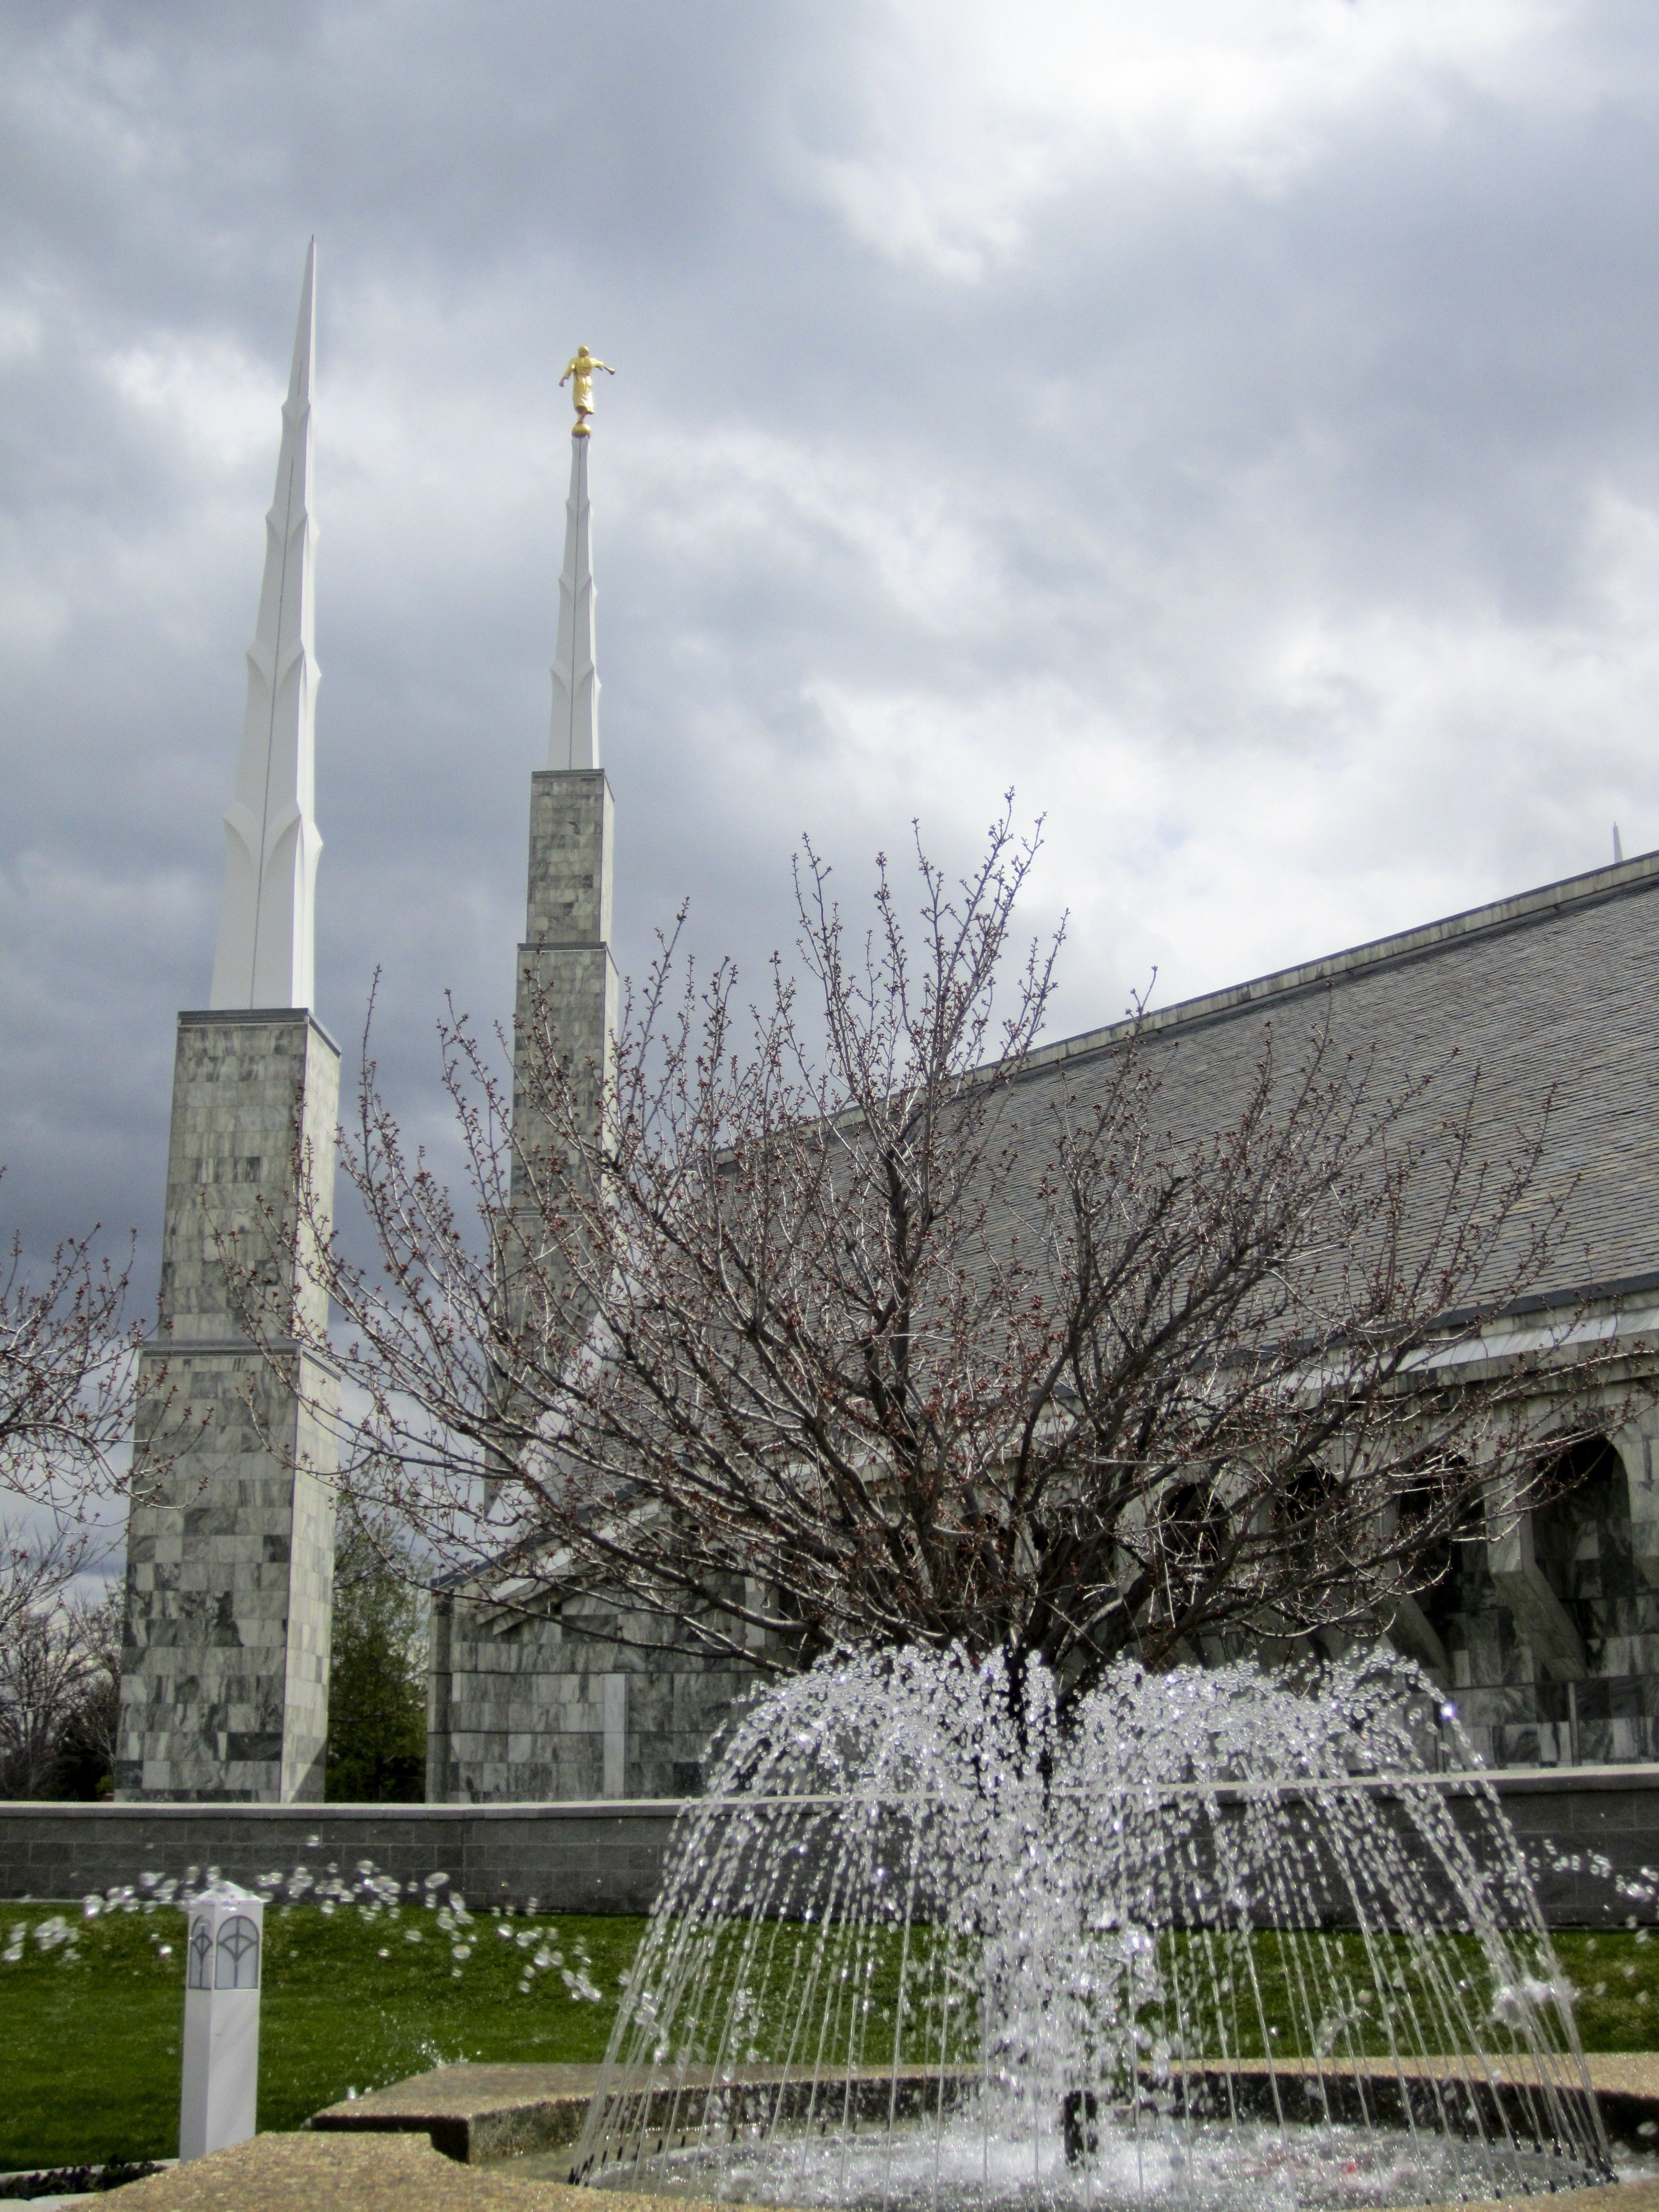 A fountain on the grounds of the Boise Idaho Temple.